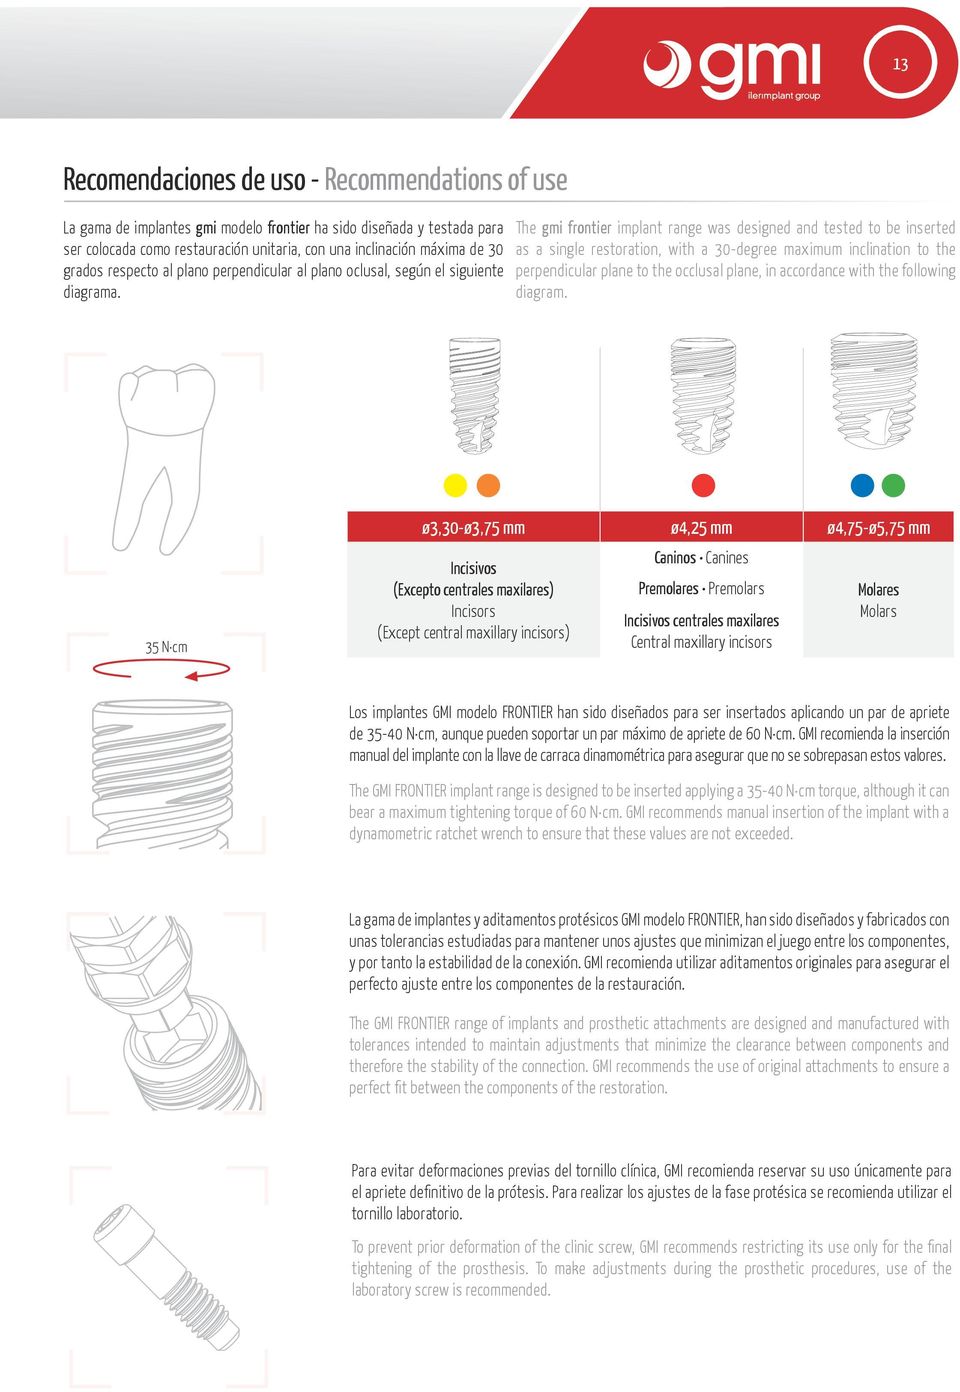 The gmi frontier implant range was designed and tested to be inserted as a single restoration, with a 30-degree maximum inclination to the perpendicular plane to the occlusal plane, in accordance